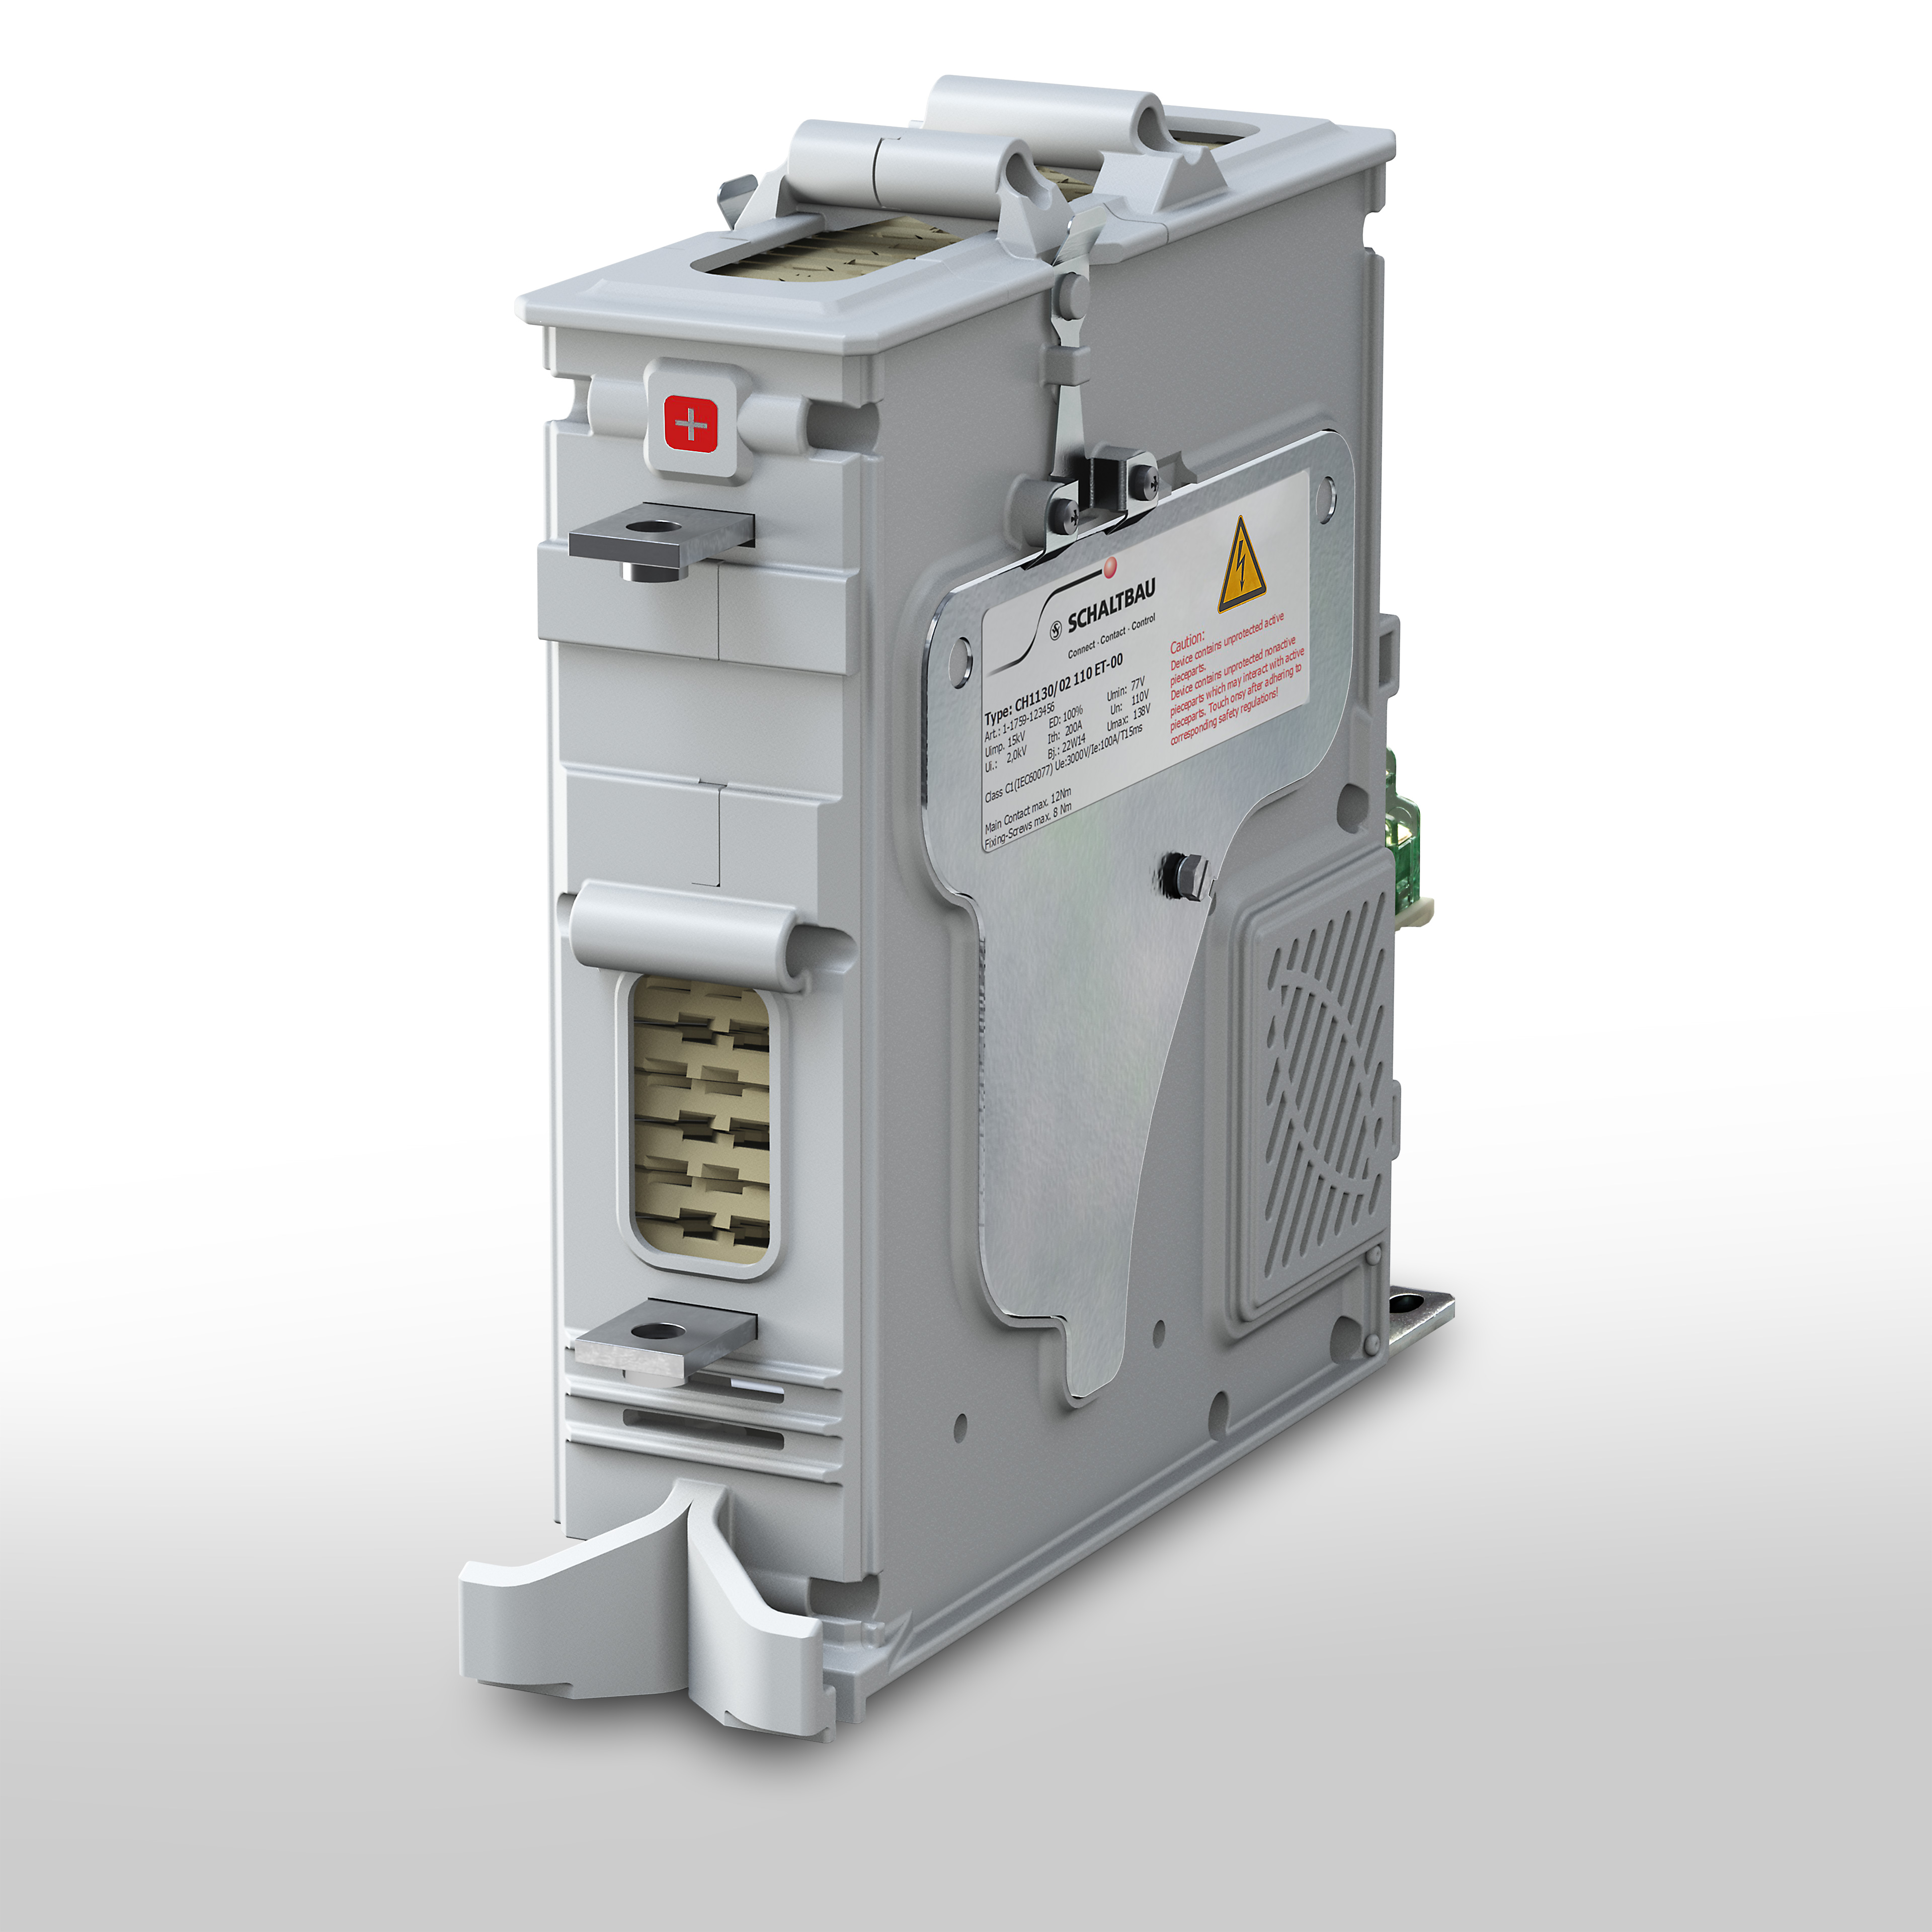 CH – High-voltage contactor up to 3000 Volt